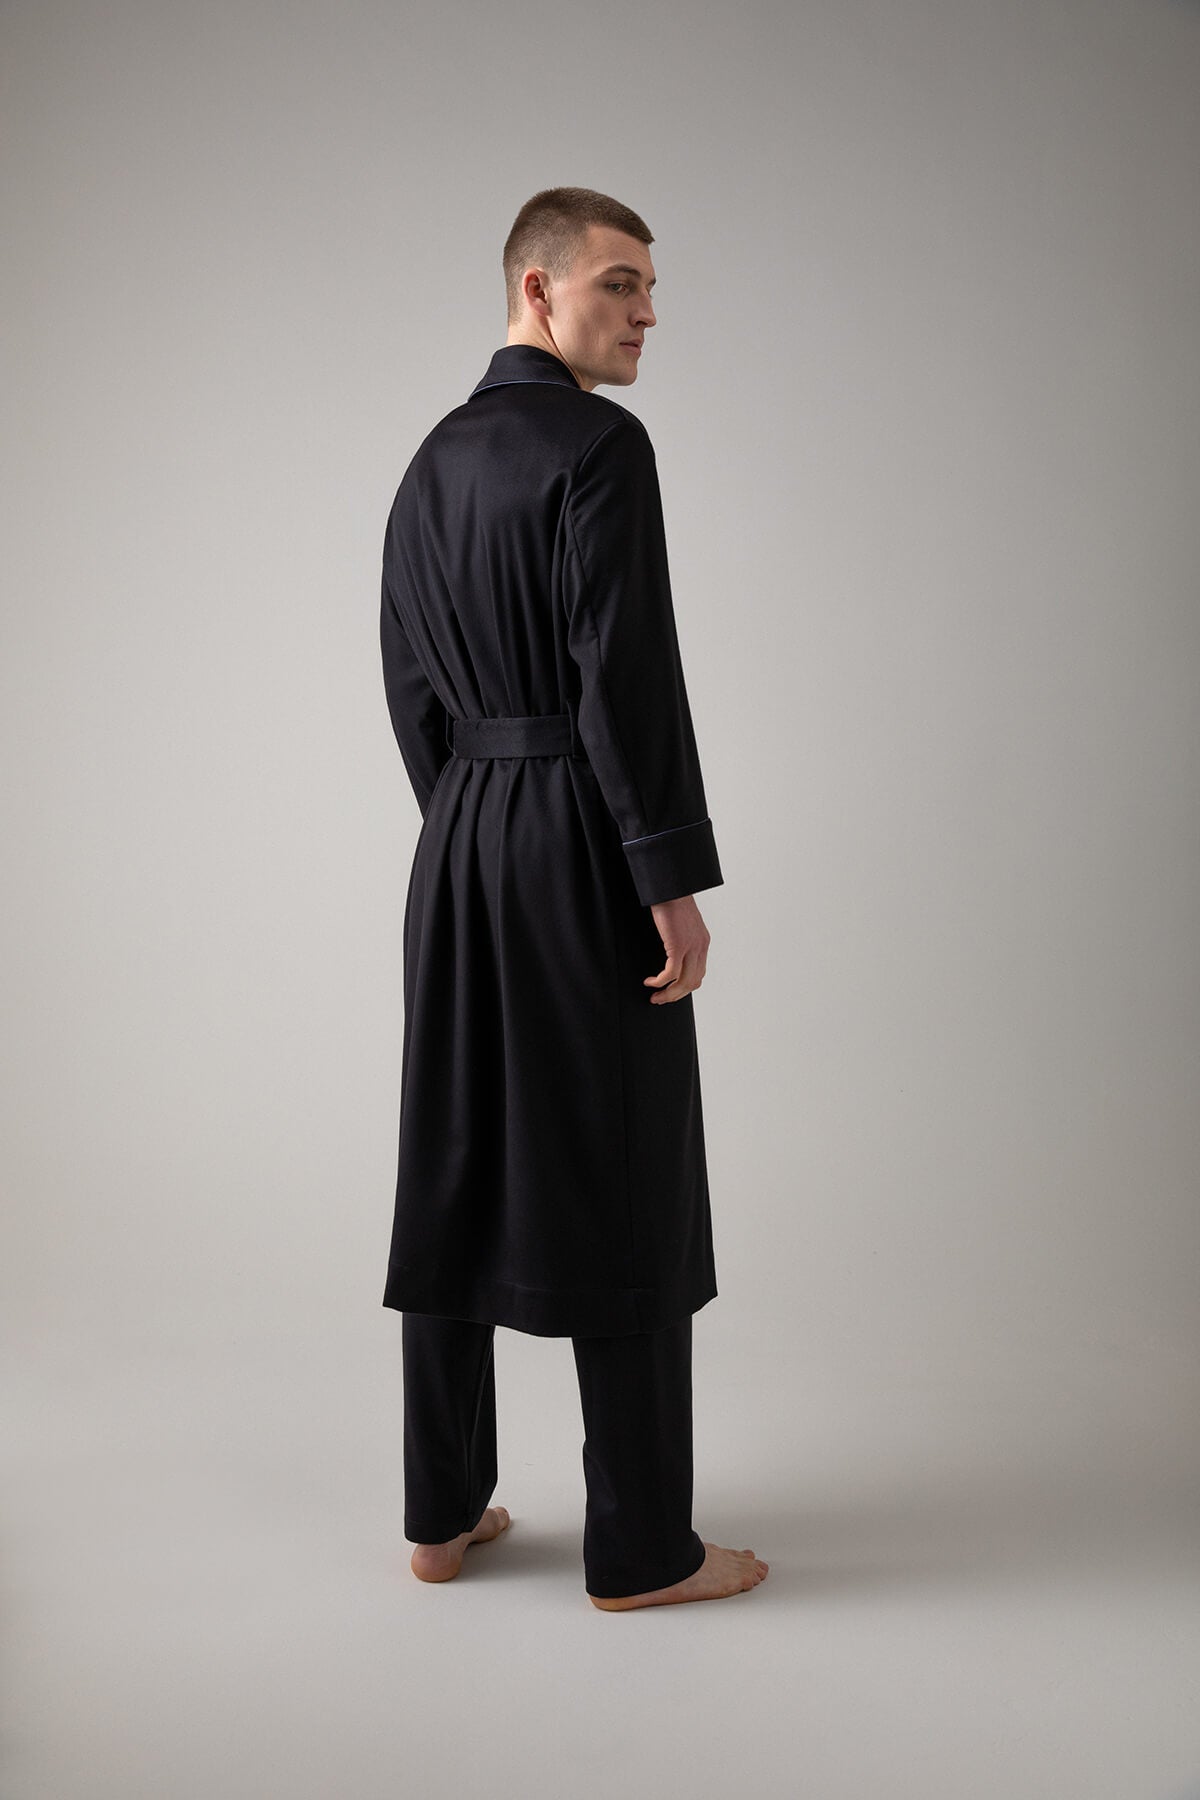 Johnstons of Elgin’s Men's Navy Cashmere Dressing Gown with Silk Lining on model wearing navy bottoms on a grey background TA000472RU65880